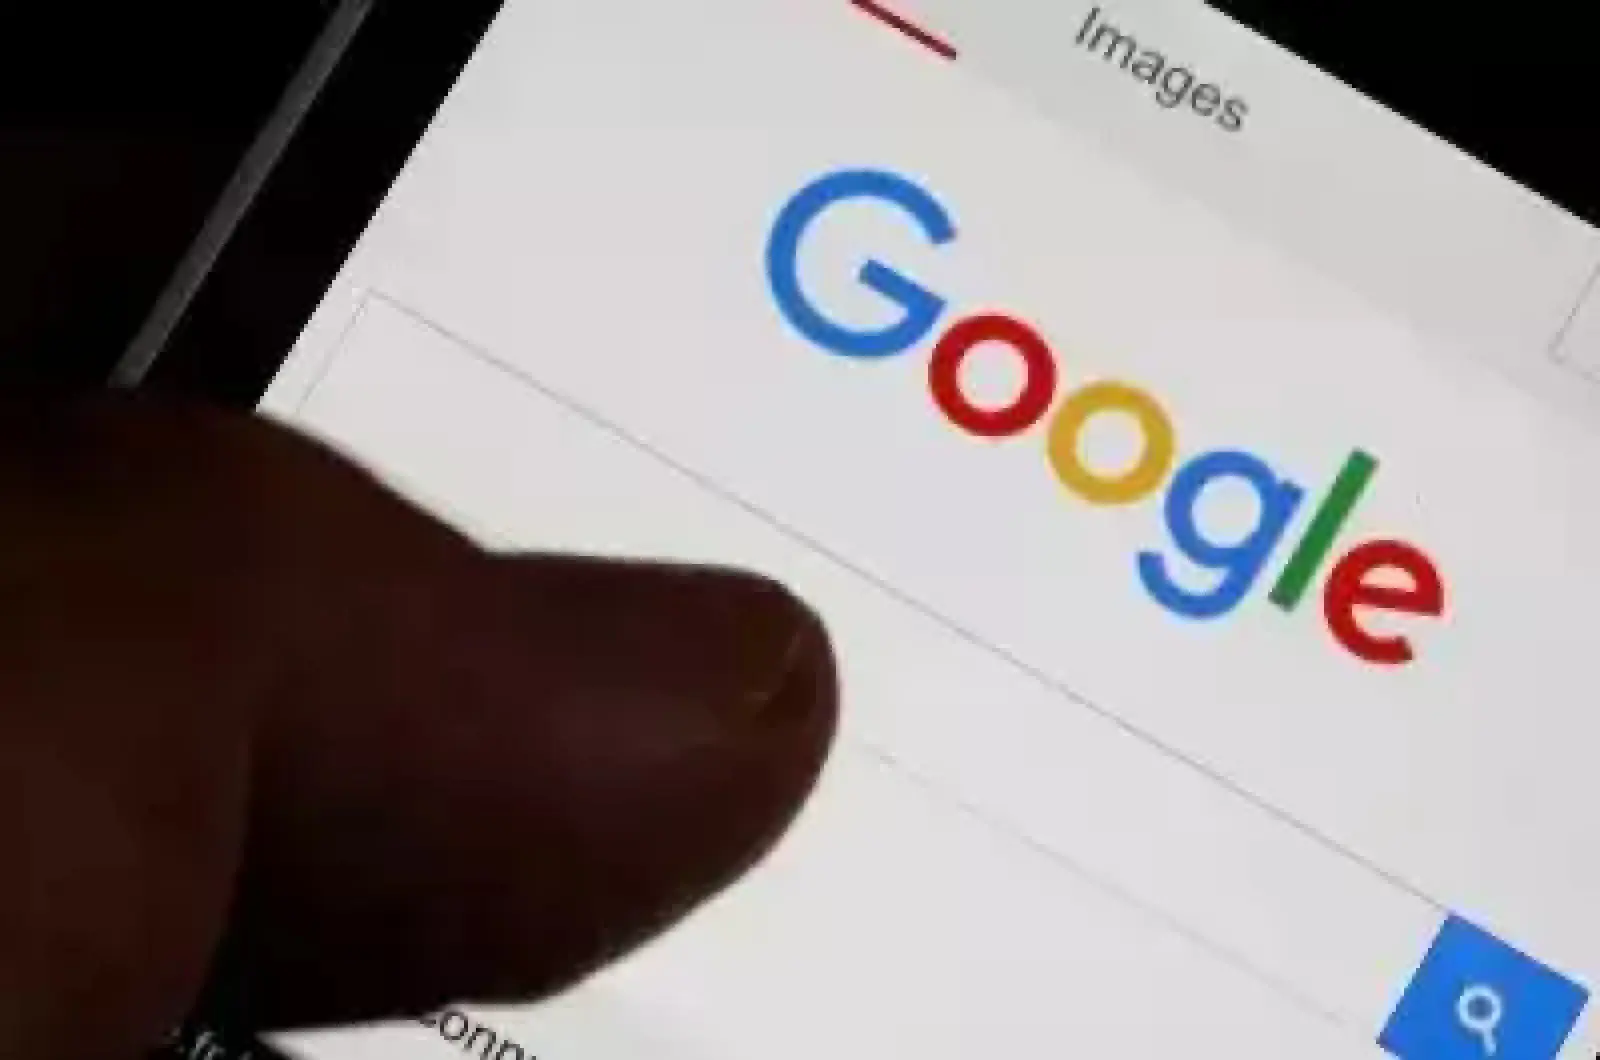 Google is going to make a big change in search results, users will not like it